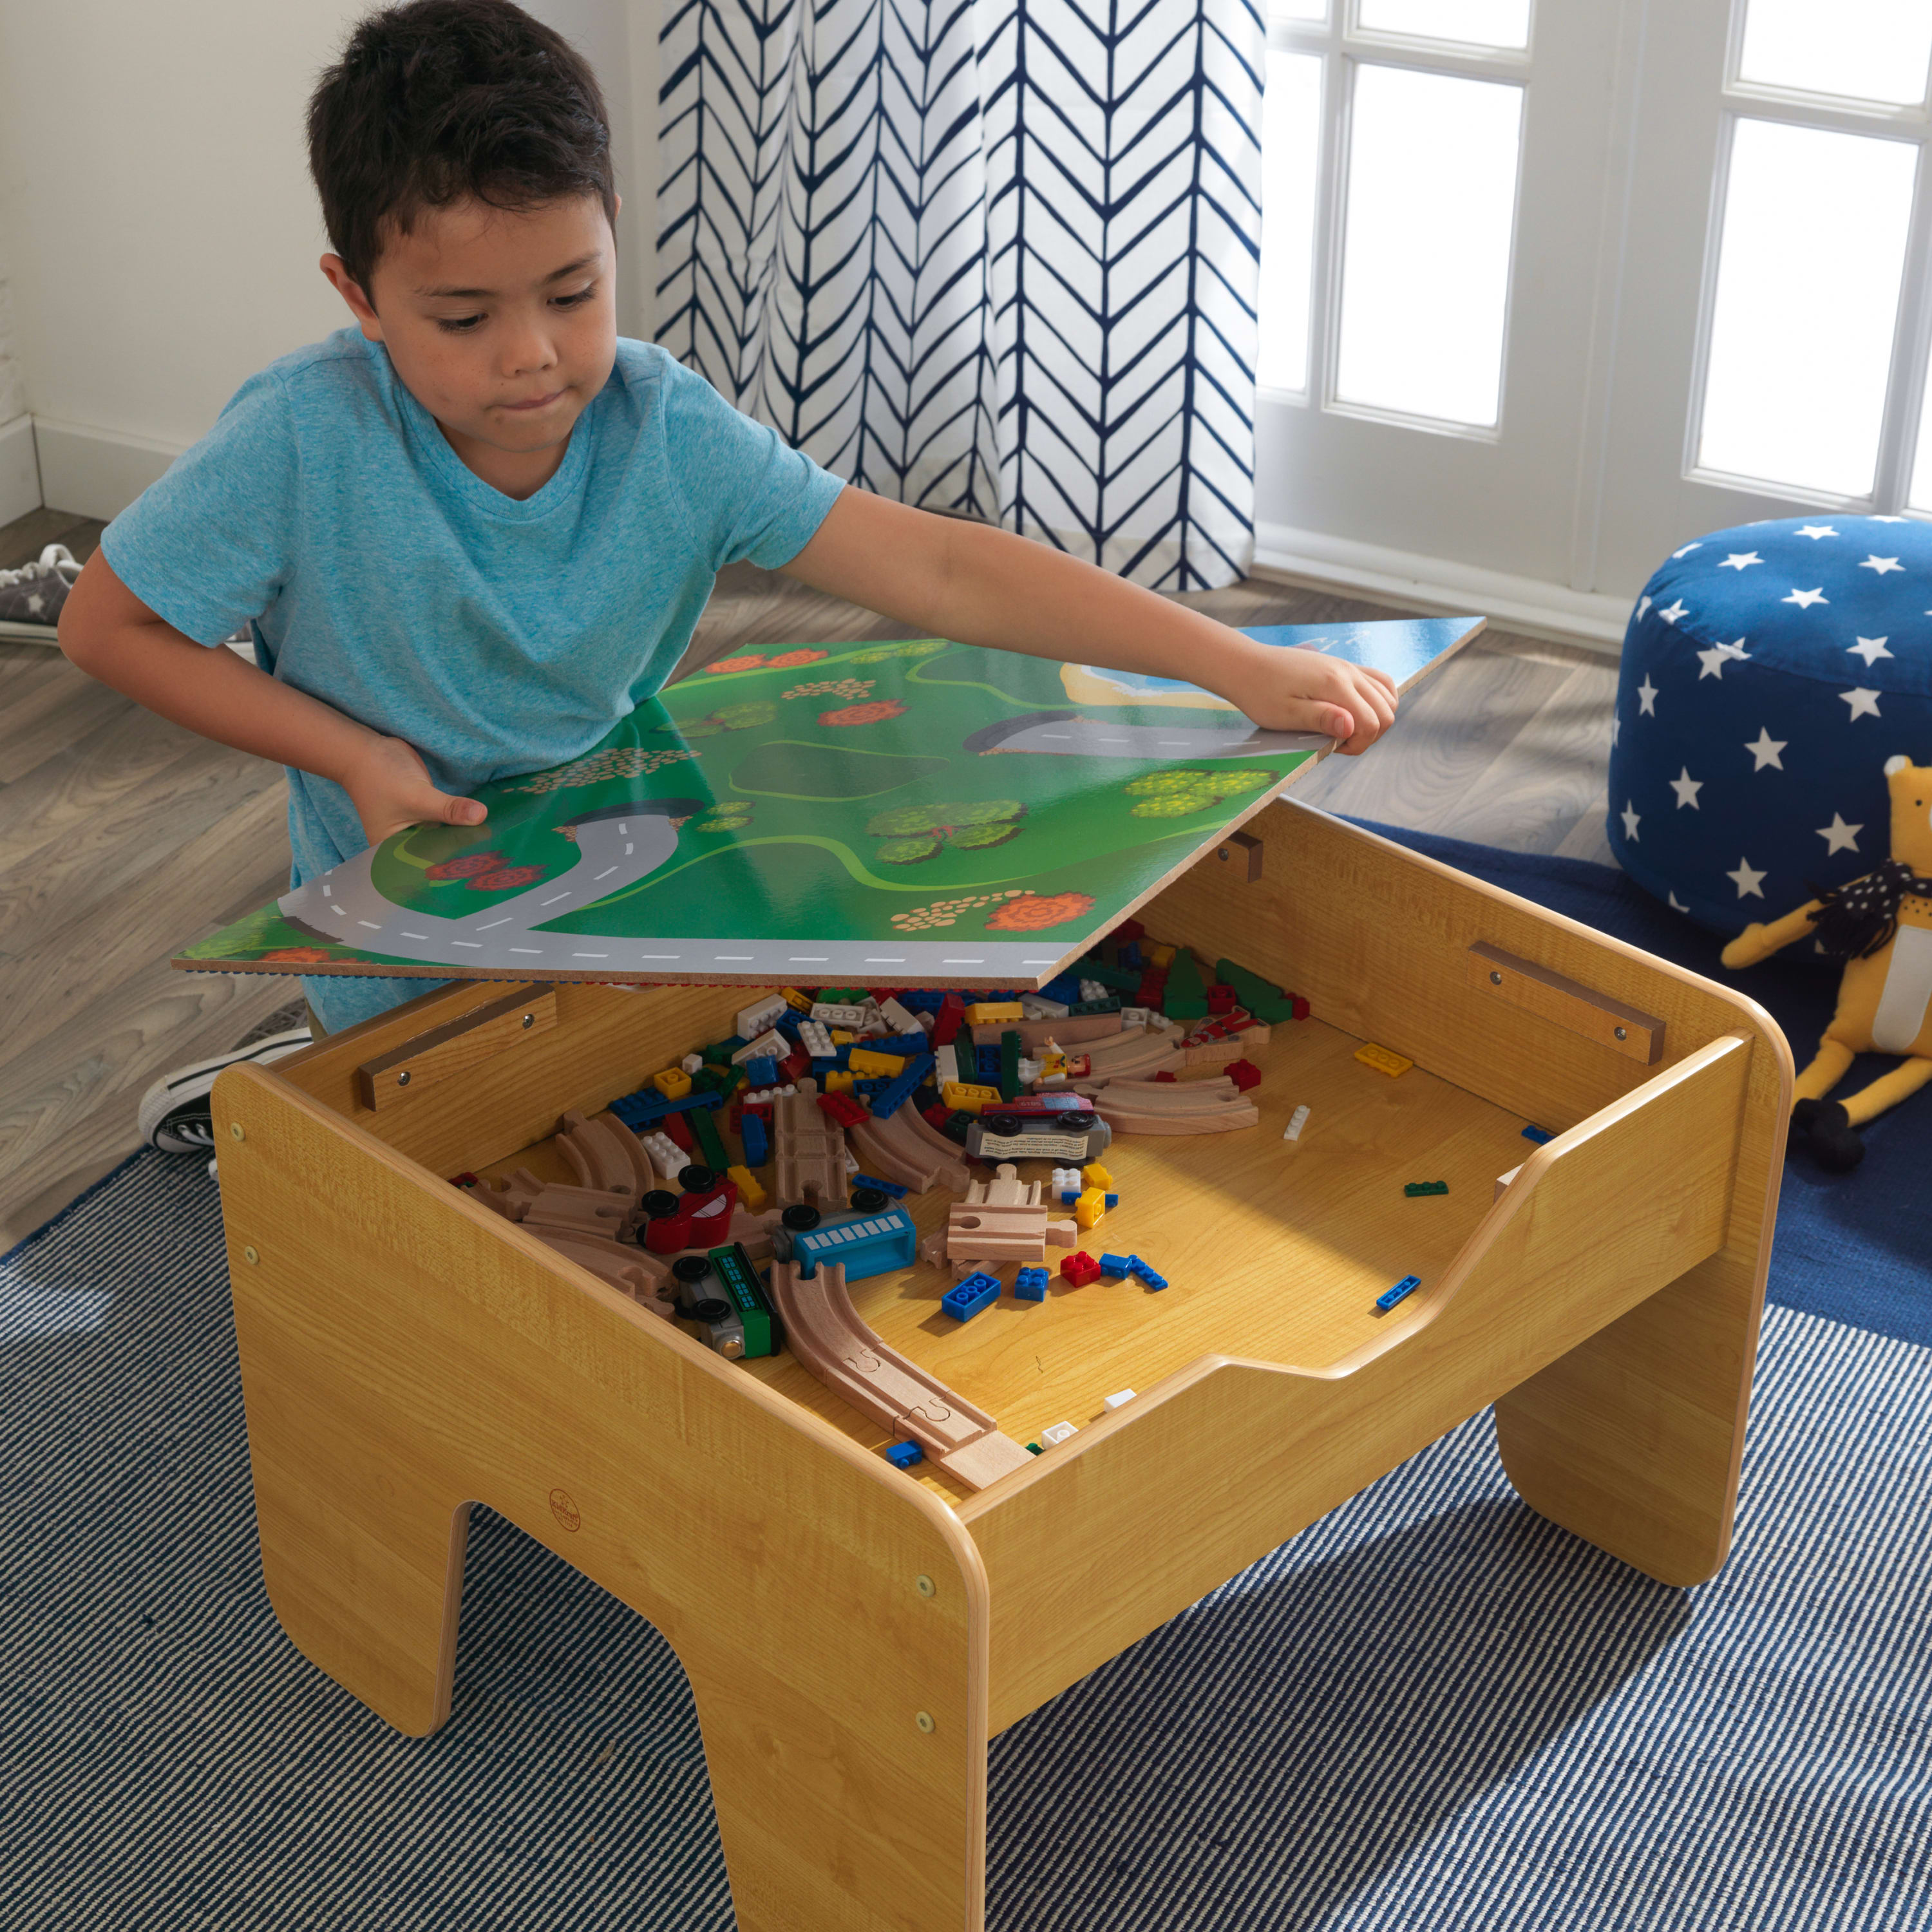 KidKraft Reversible Wooden Activity Table with Board and Train Set, Natural, for Ages 3+ Years - image 5 of 11